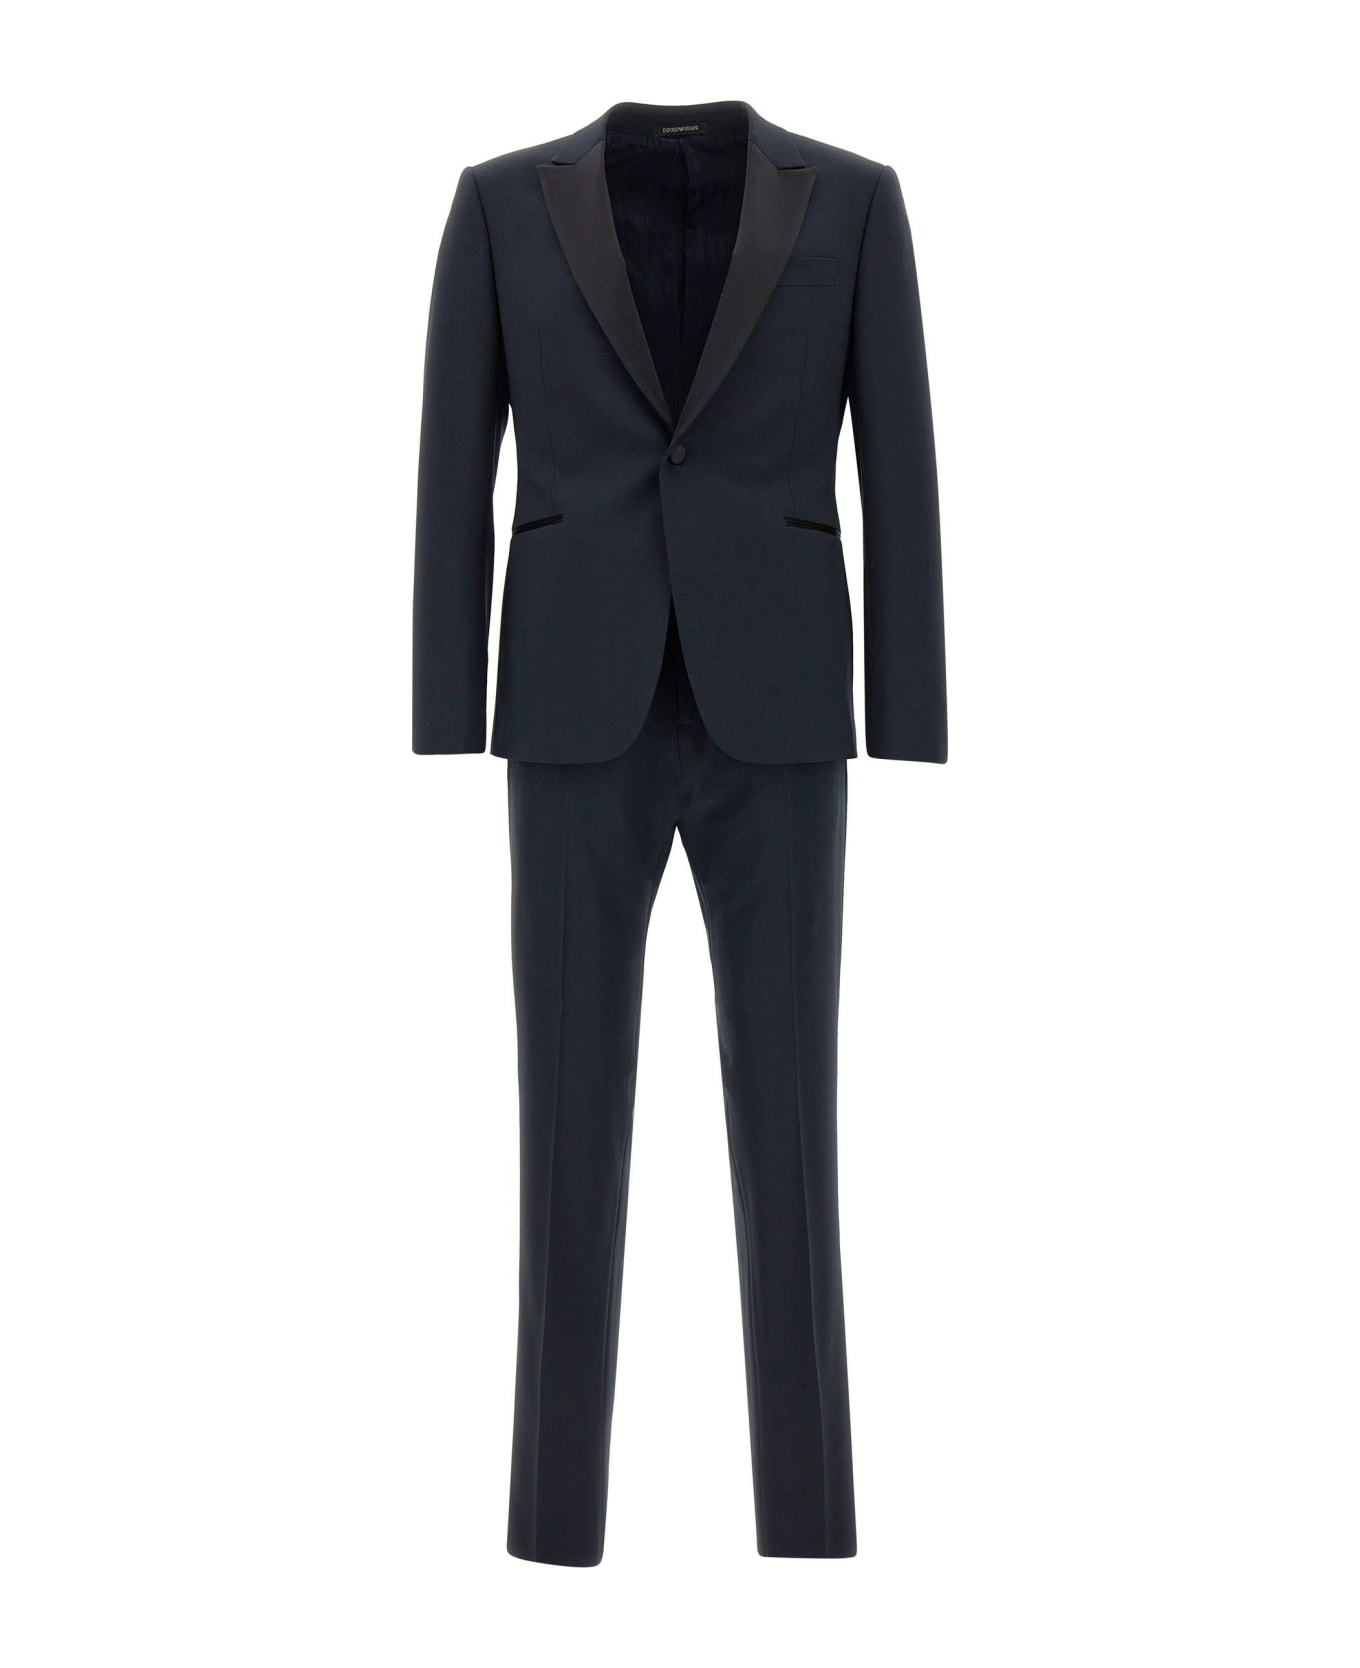 Emporio Armani Fresh Wool Two-piece Formal Suit - BLUE スーツ